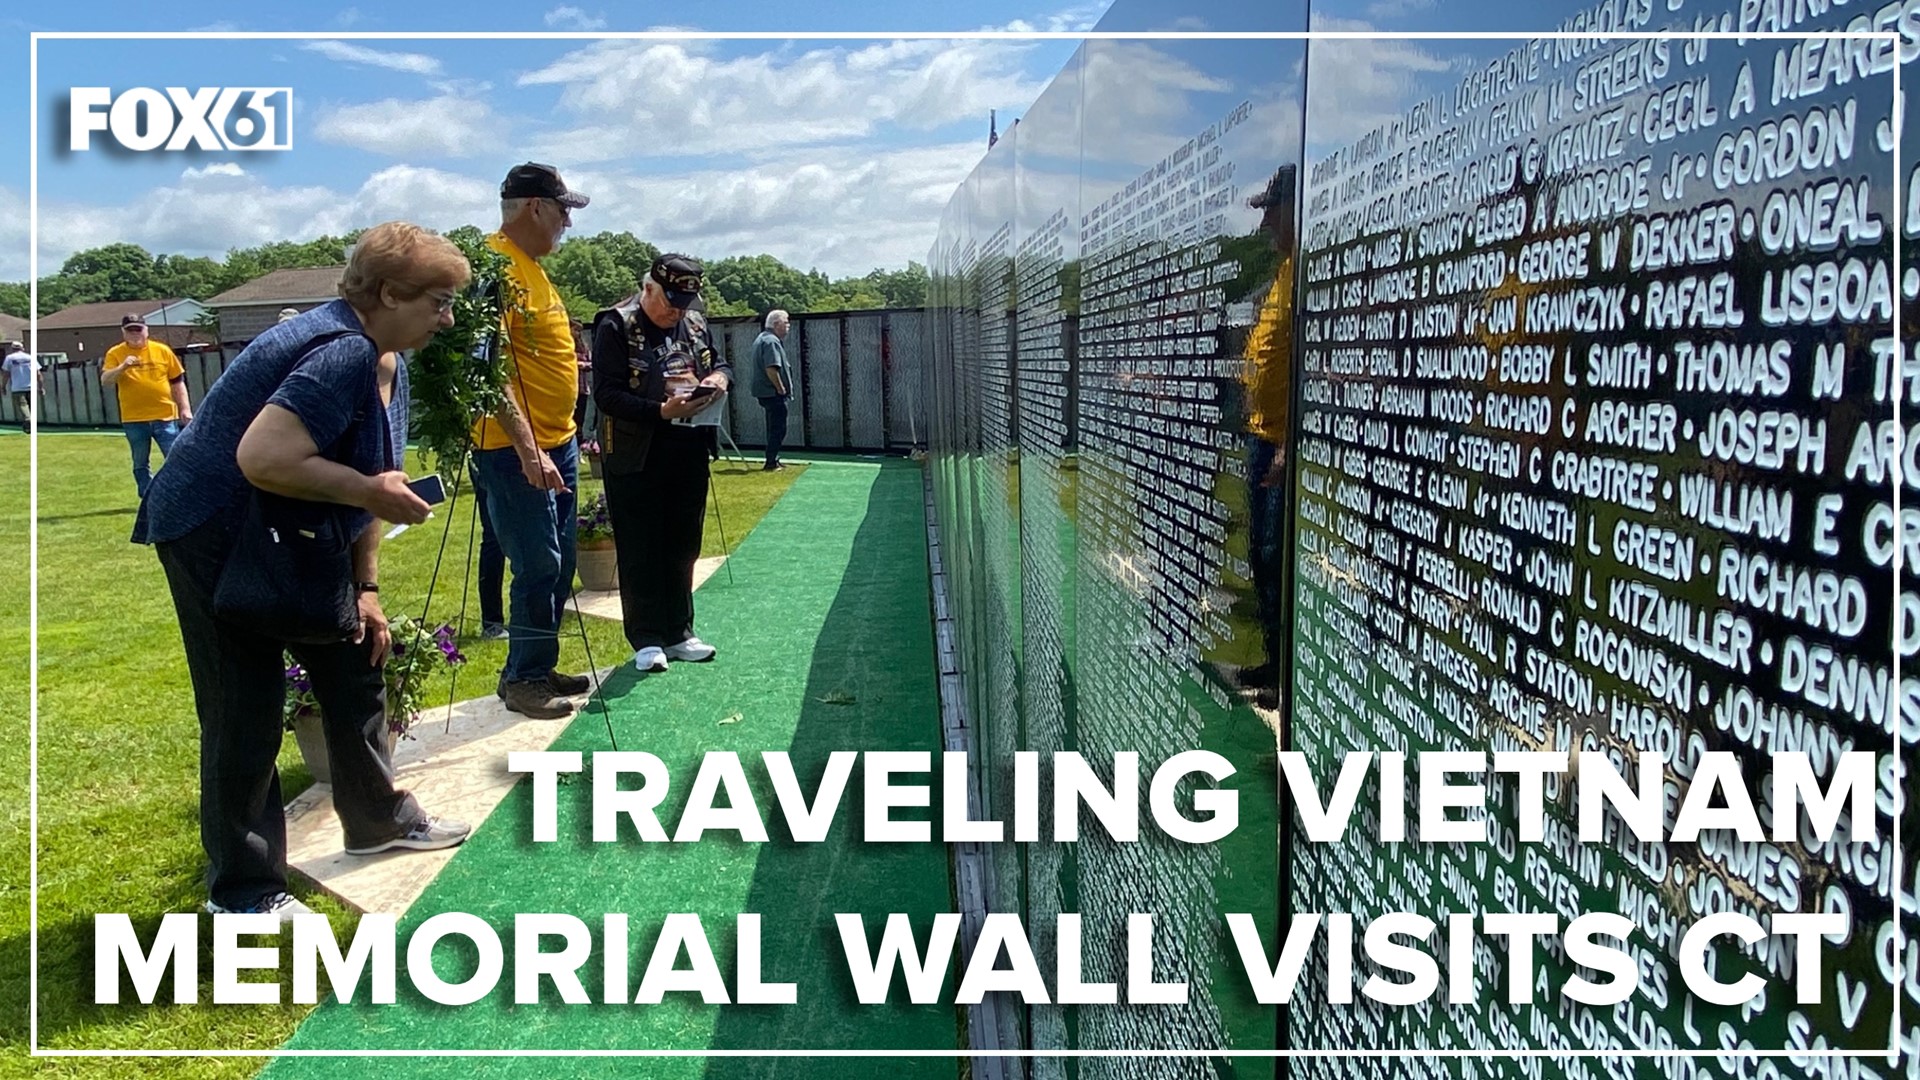 The wall is a 3/5th replica of the original Vietnam Memorial in Washington, D.C.